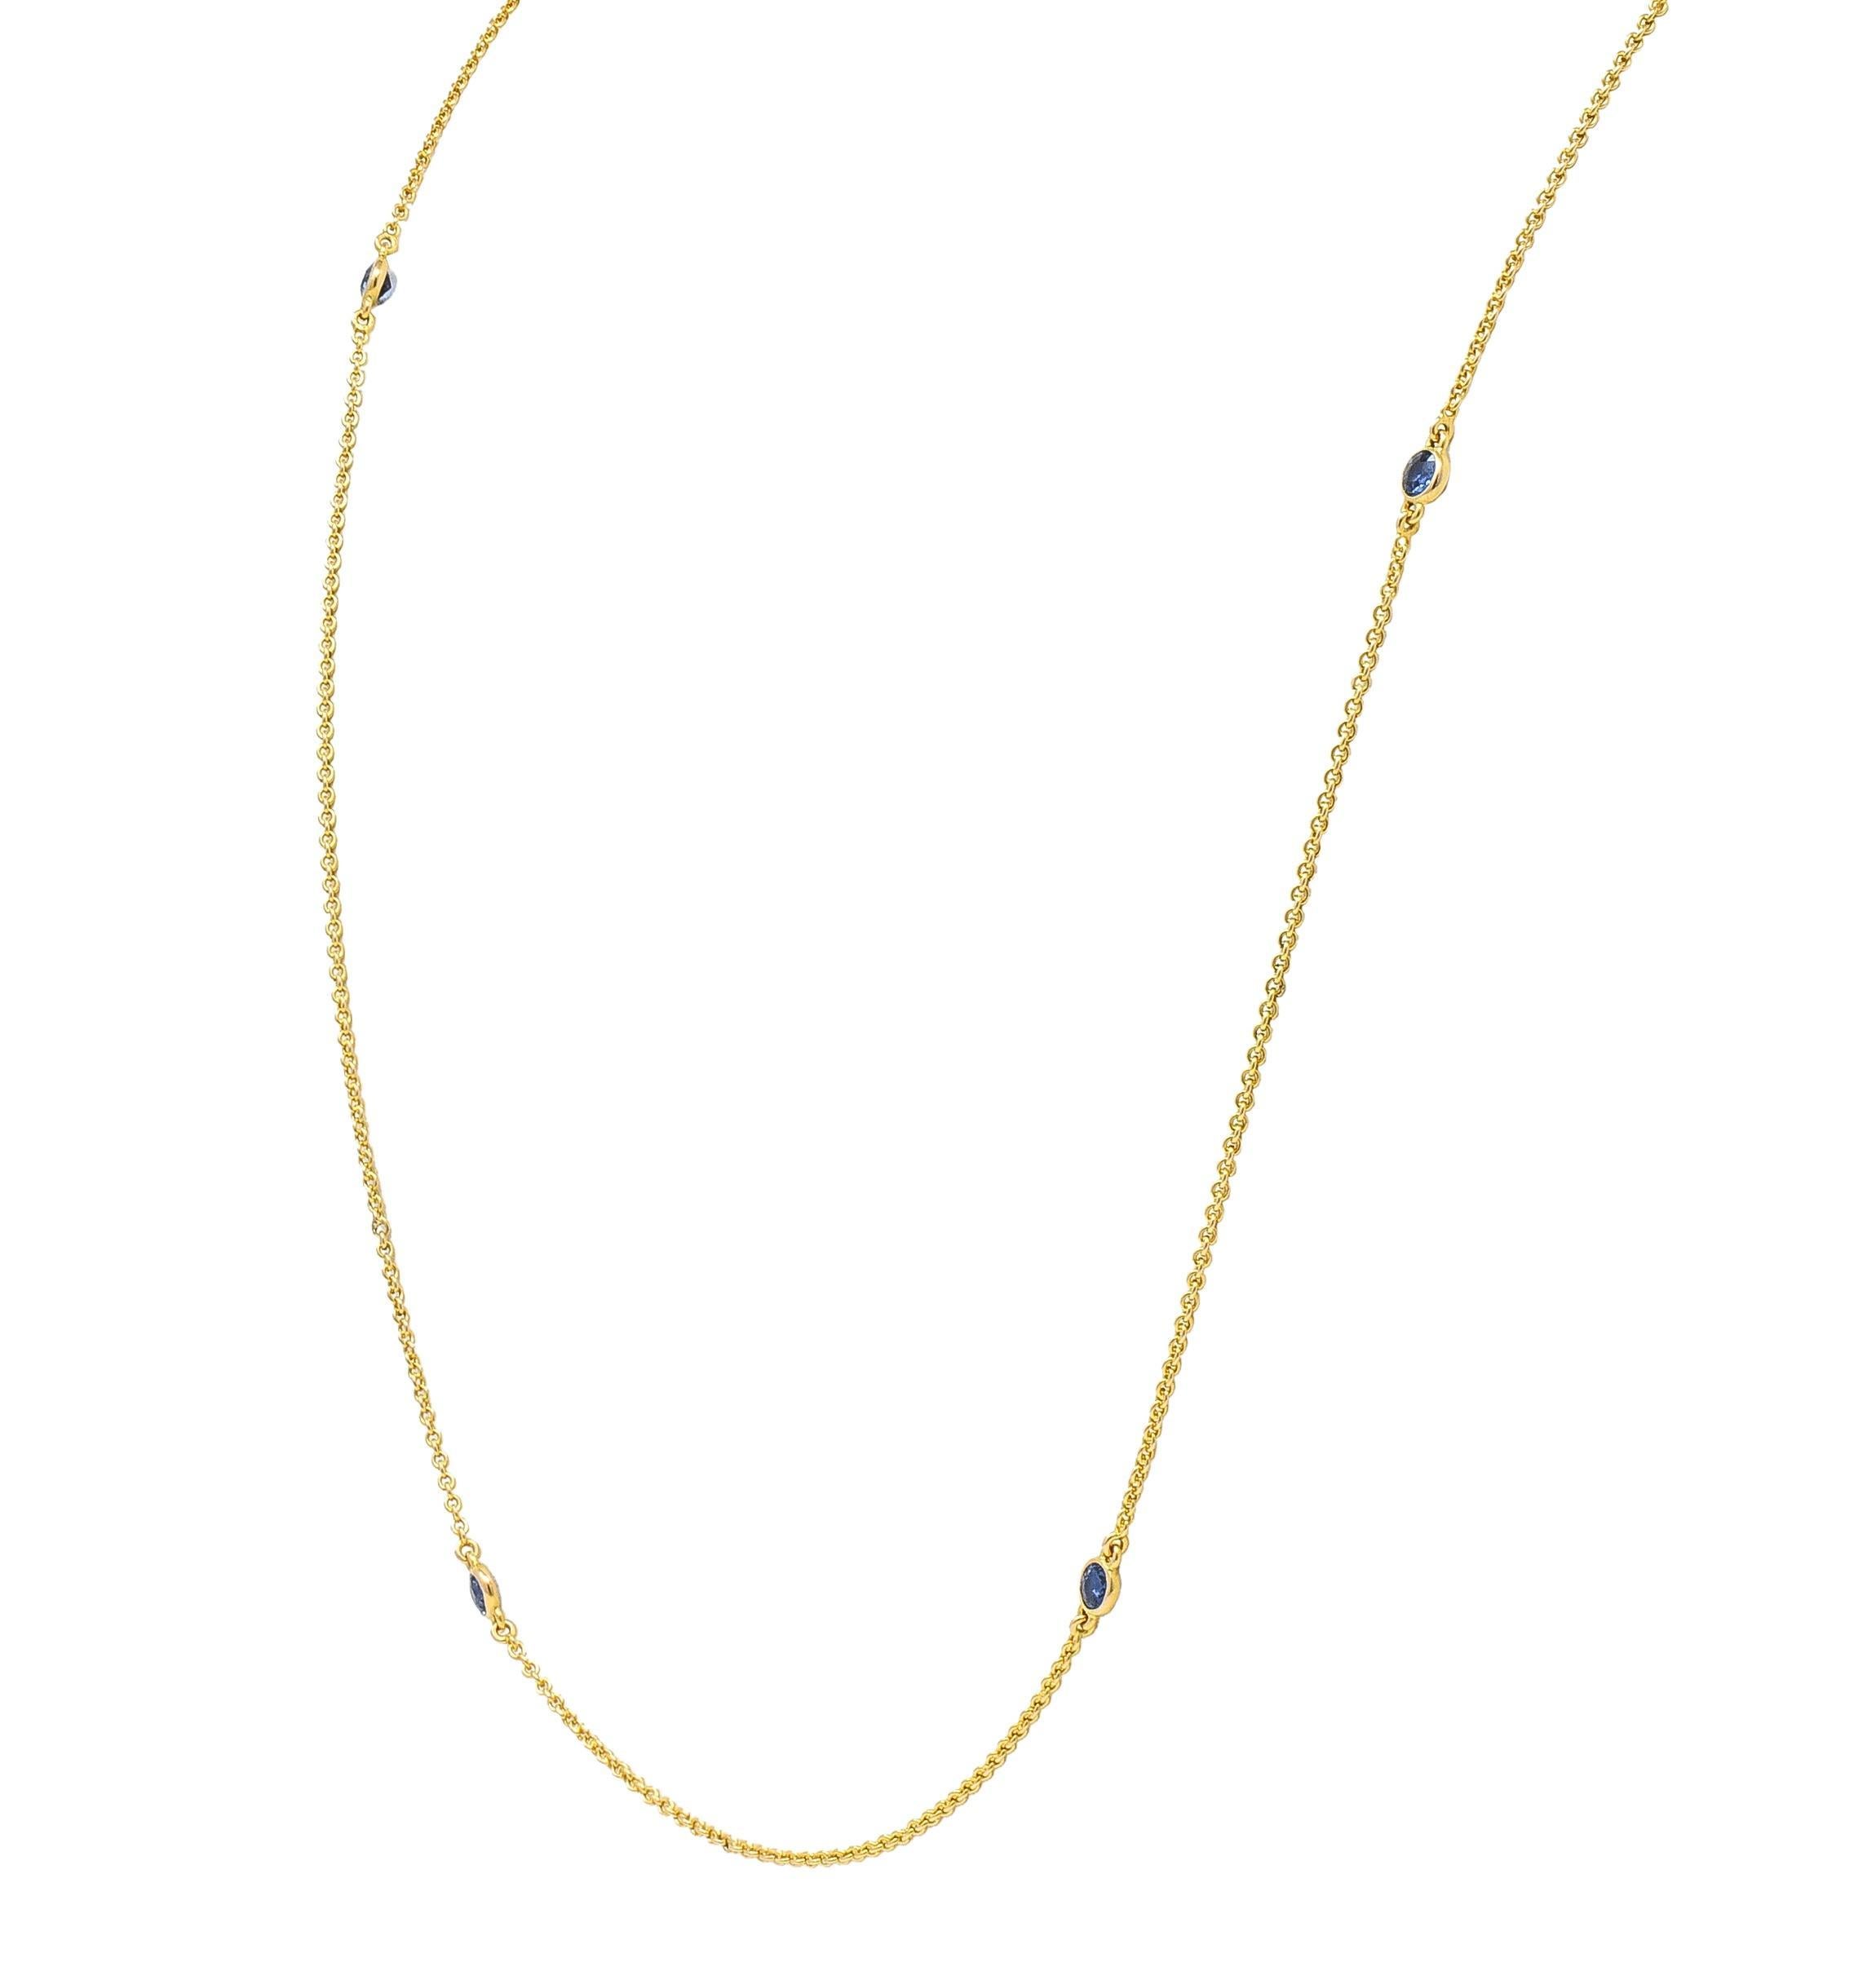 Victorian 2.10 CTW Sapphire 14 Karat Yellow Gold Antique Station Chain Necklace For Sale 2